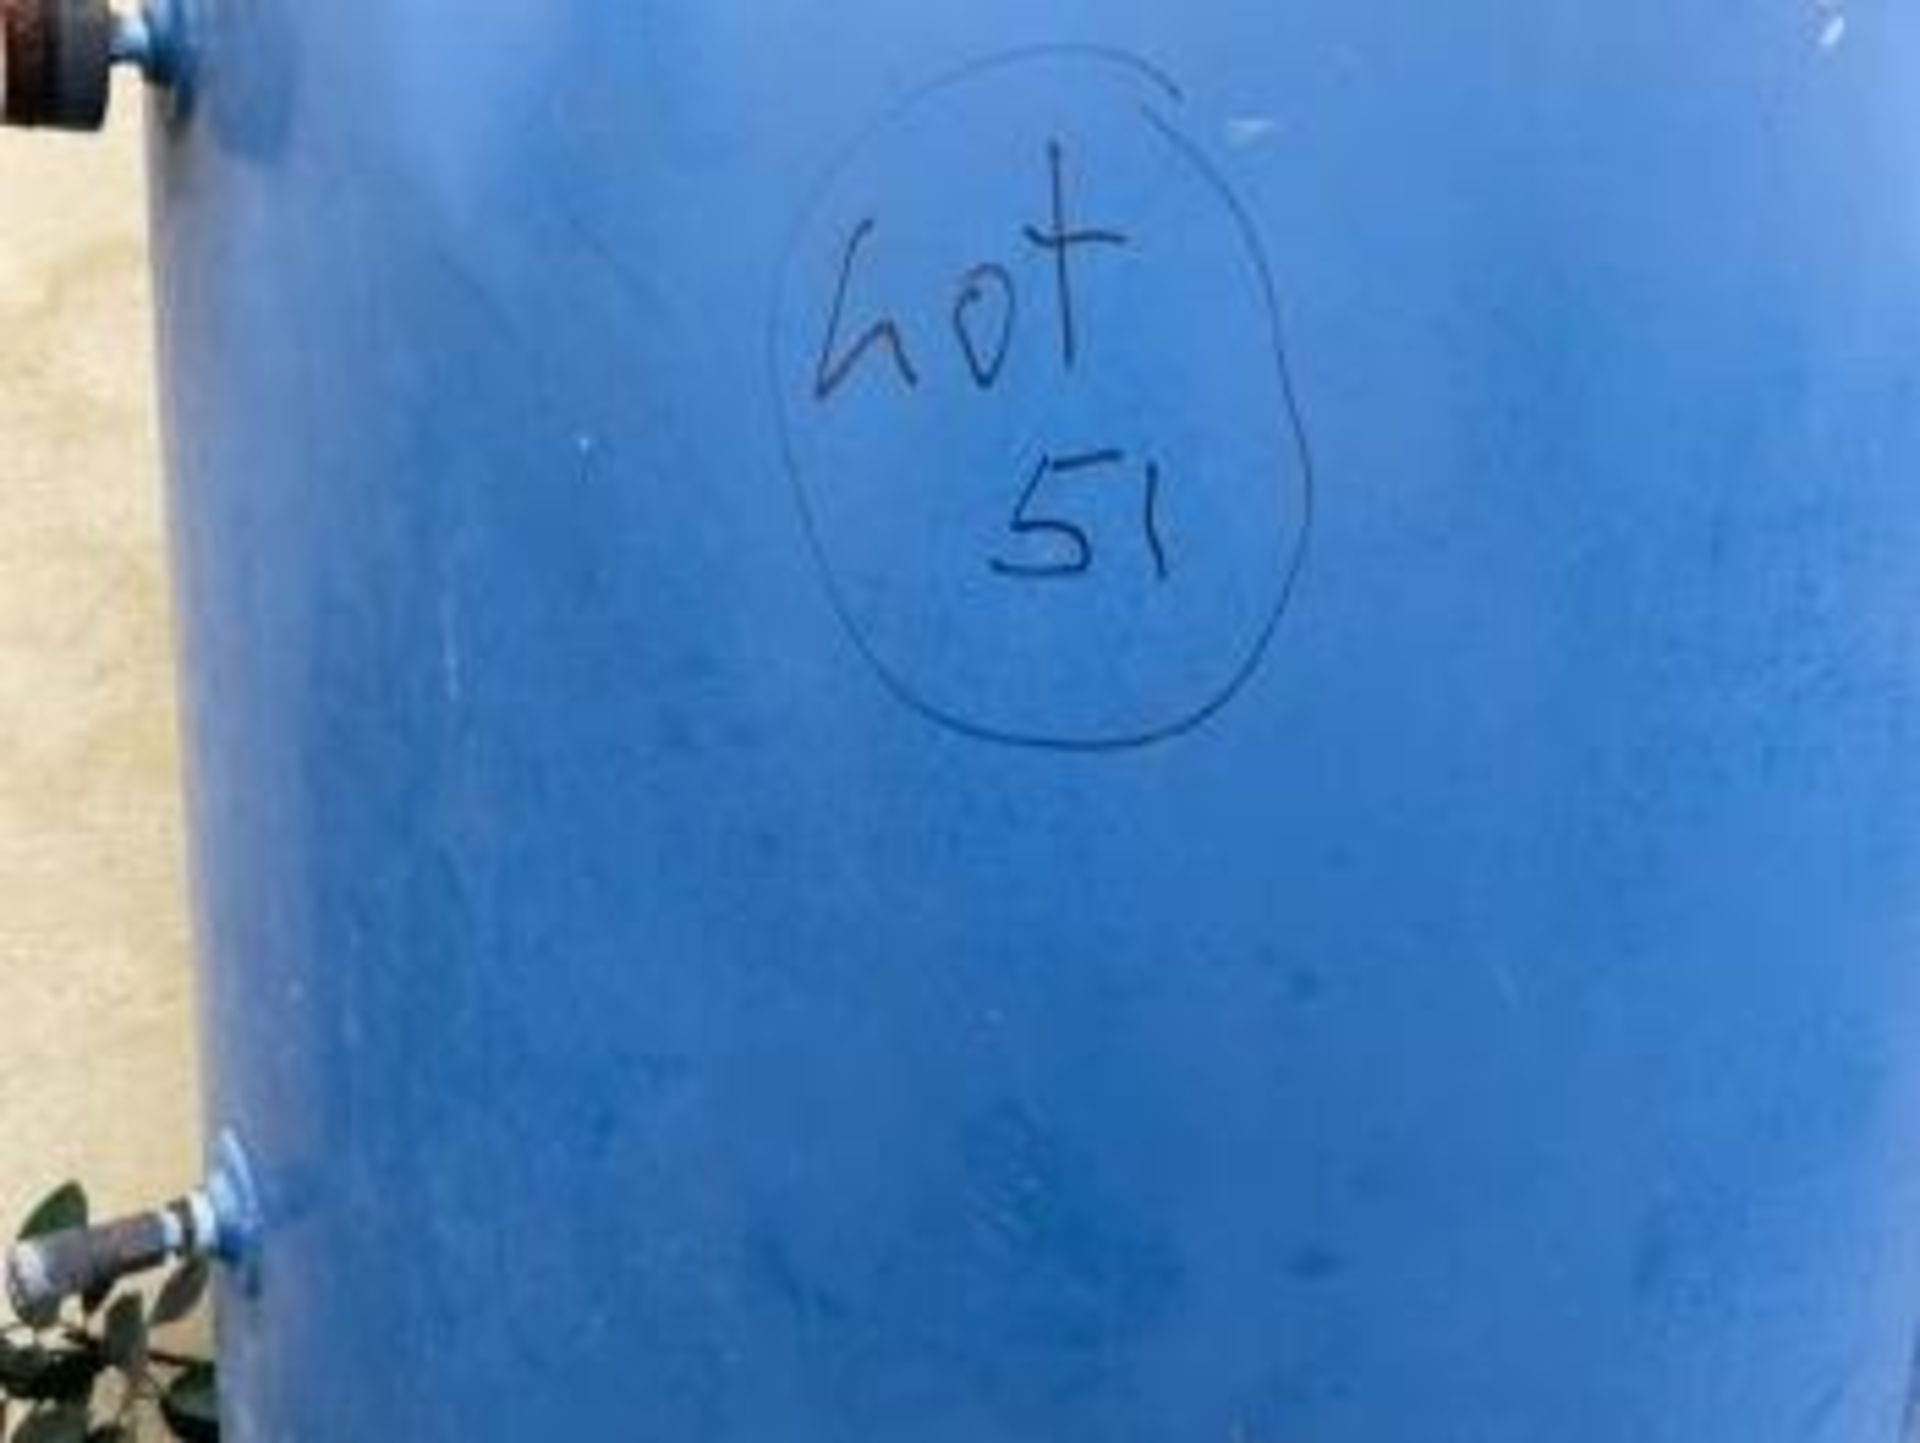 BLUE AIR TANK - 300 GALLON (OUTSIDE) (LOCATED IN HIALEAH, FL) - Image 2 of 4